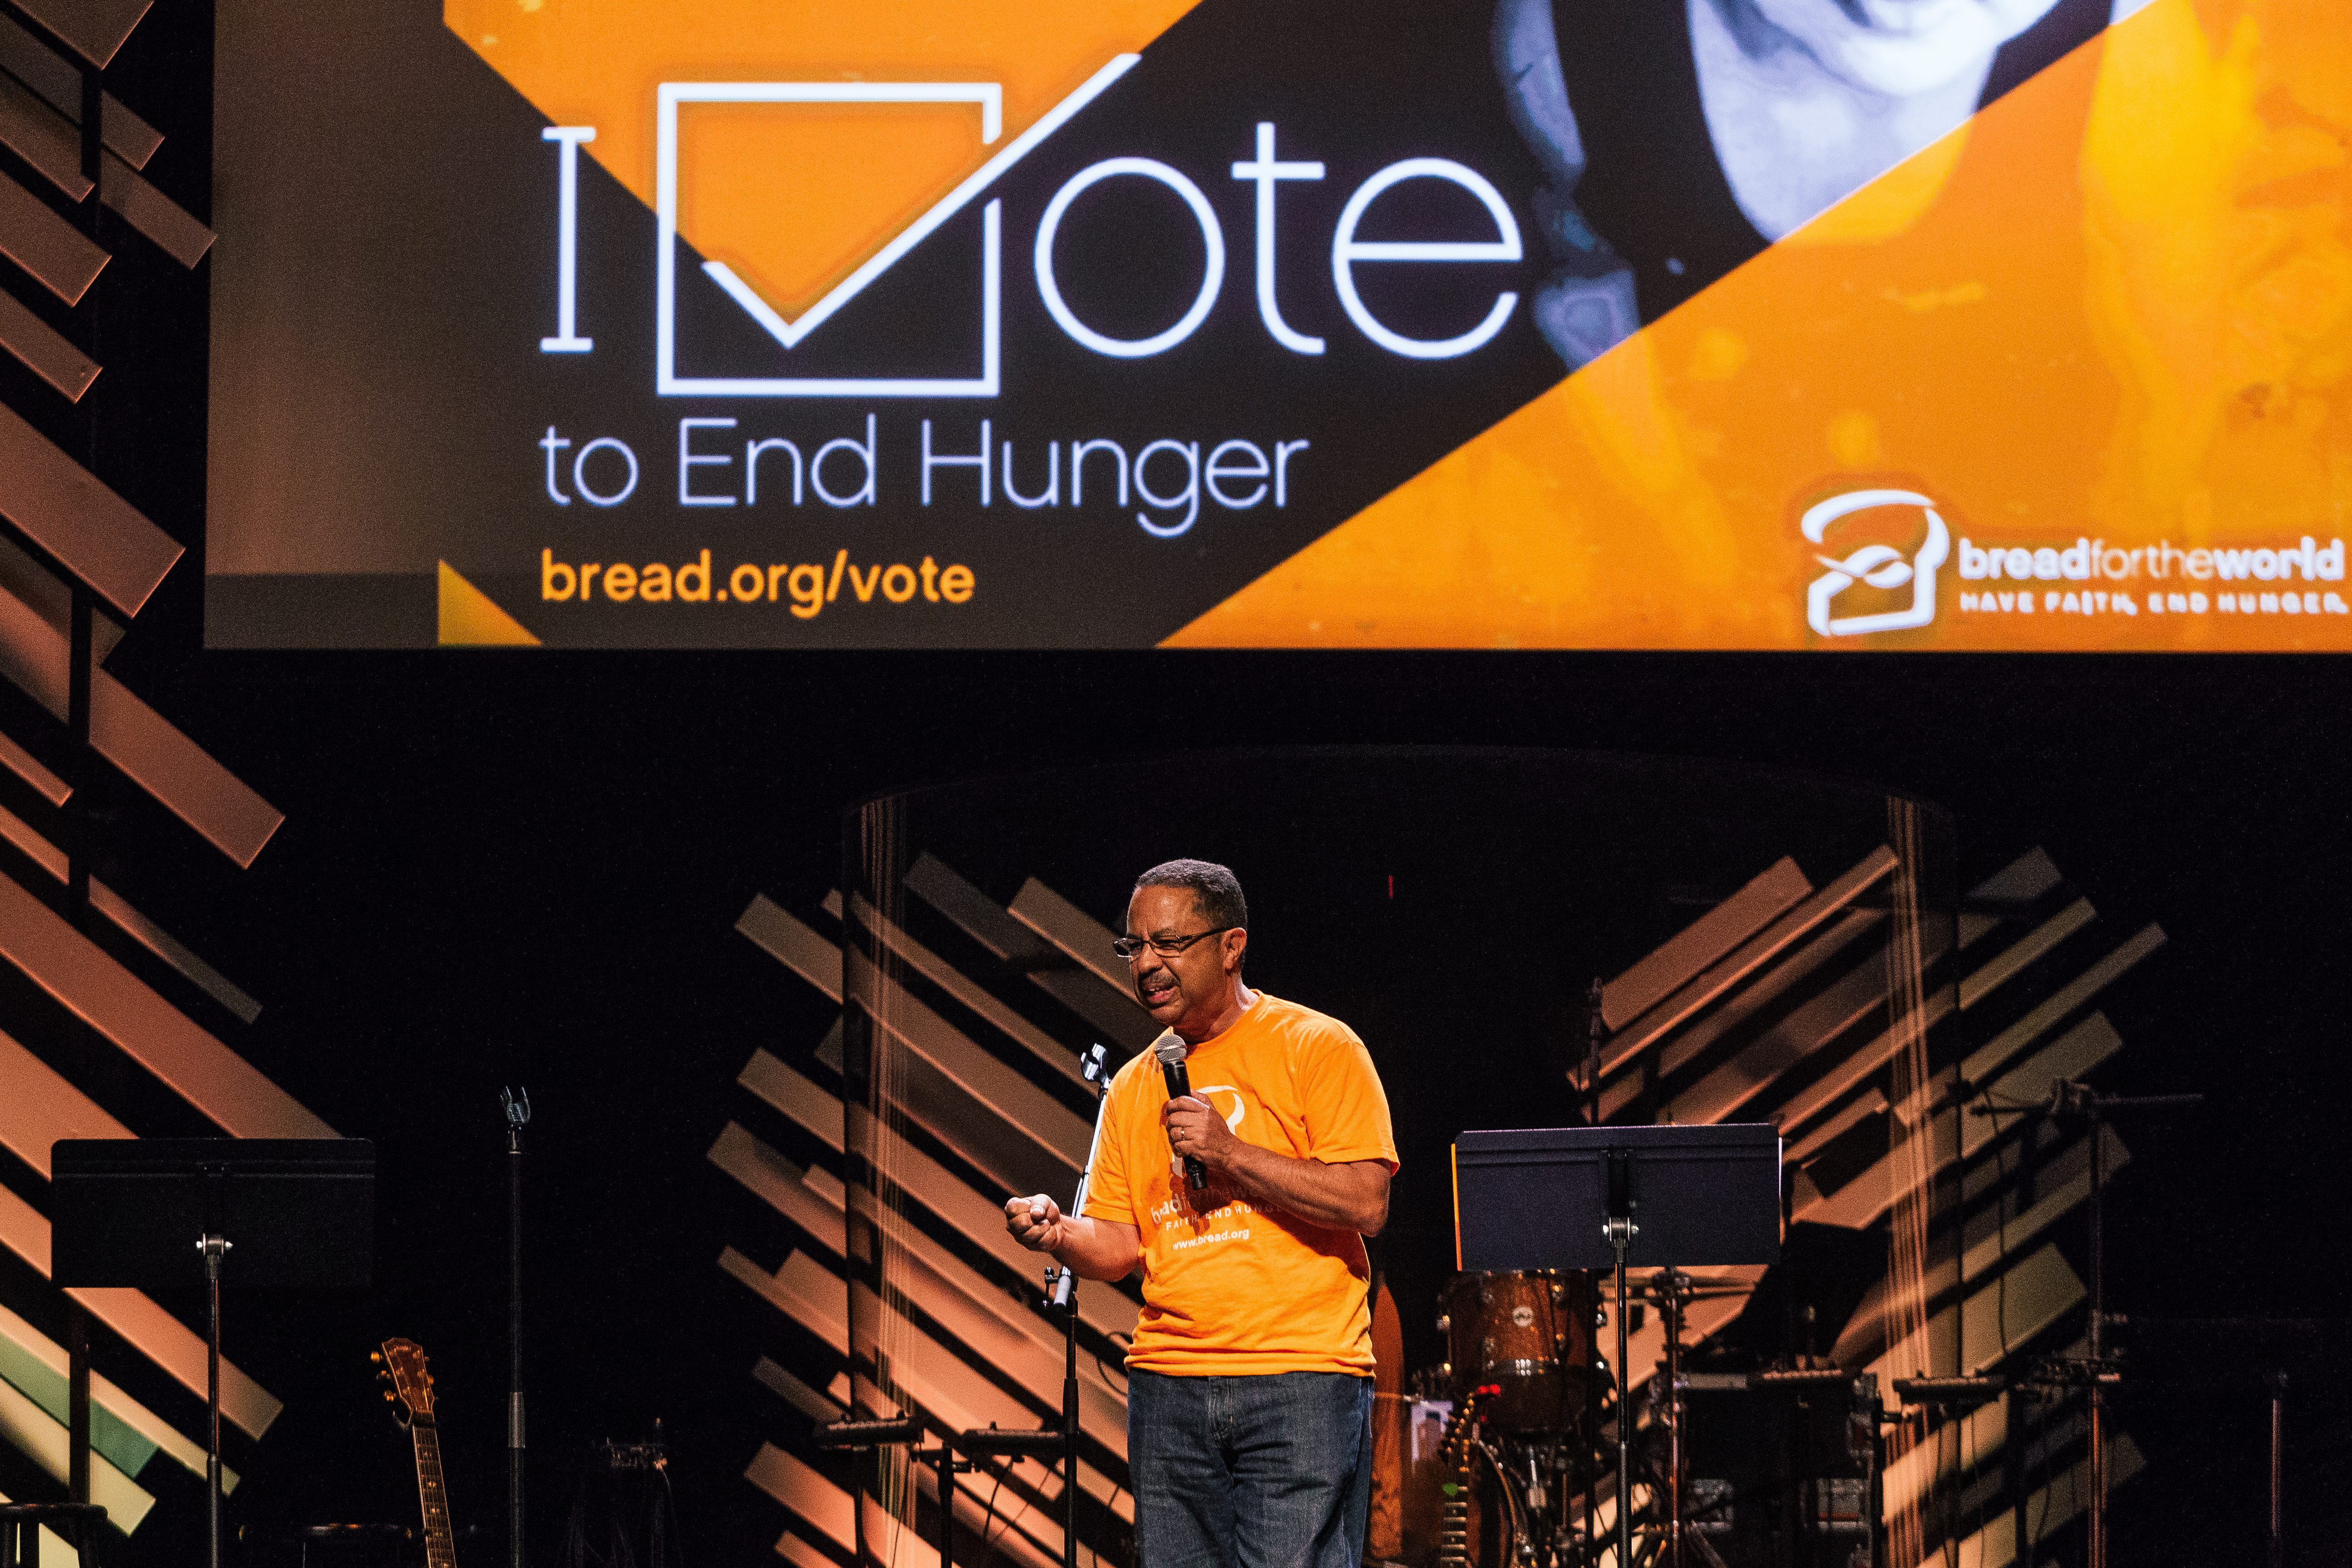 Bishop Jose Garcia, church relations director at Bread for the World, speaking at Crossing Church in Costa Mesa, Calif.  Tarren Munoz for Bread for the World.